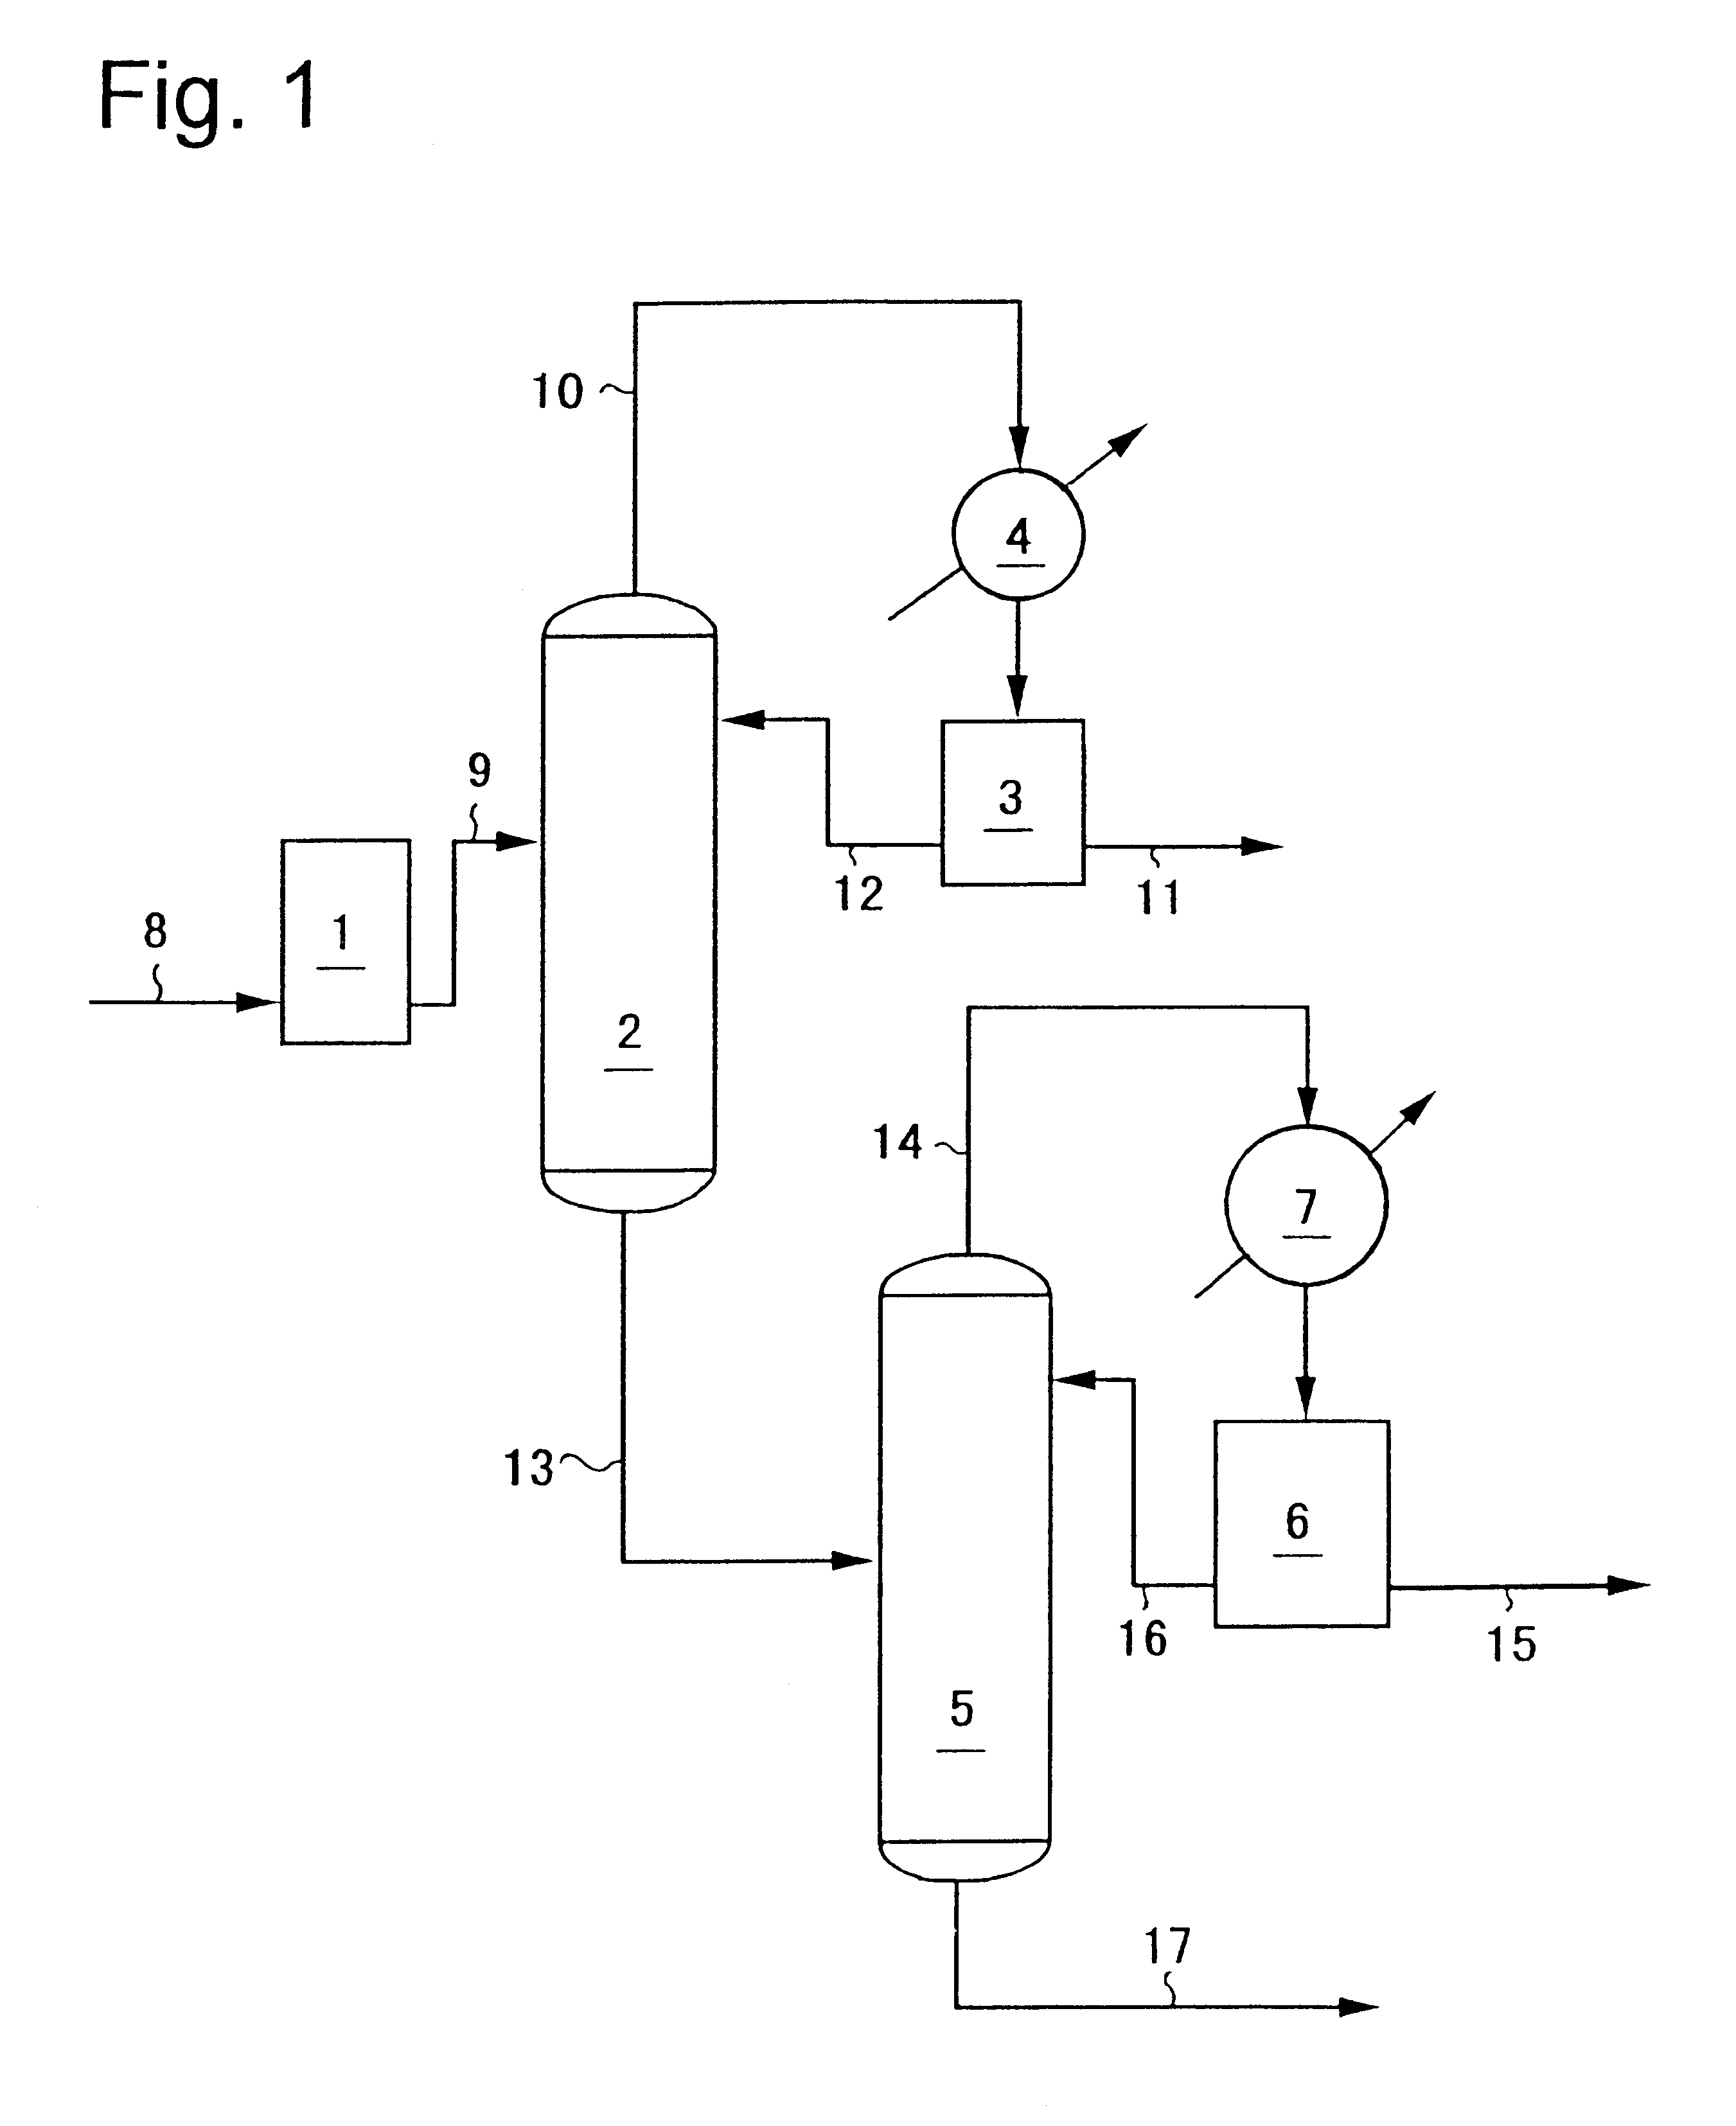 Process for recovering N-vinyl-2-pyrrolidone